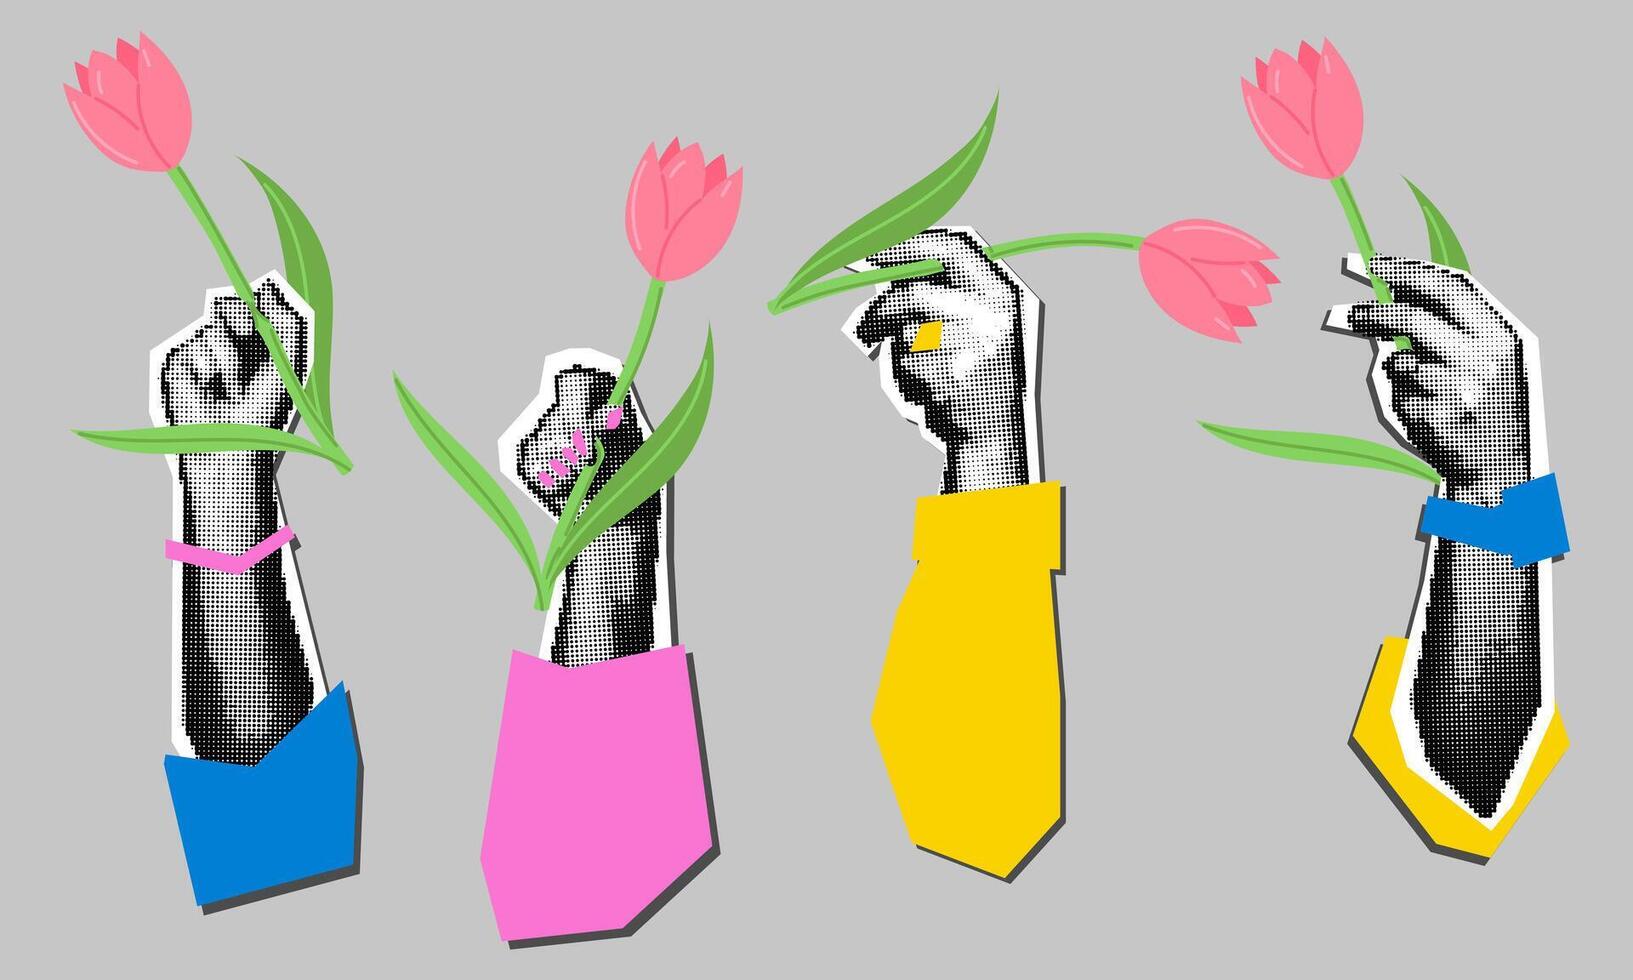 A set of women's hands with flowers. Highlighted elegant female hands . Happy International Women's Day. Female power. Feminism. Modern vector illustration in a flat style. Pop art dots collage